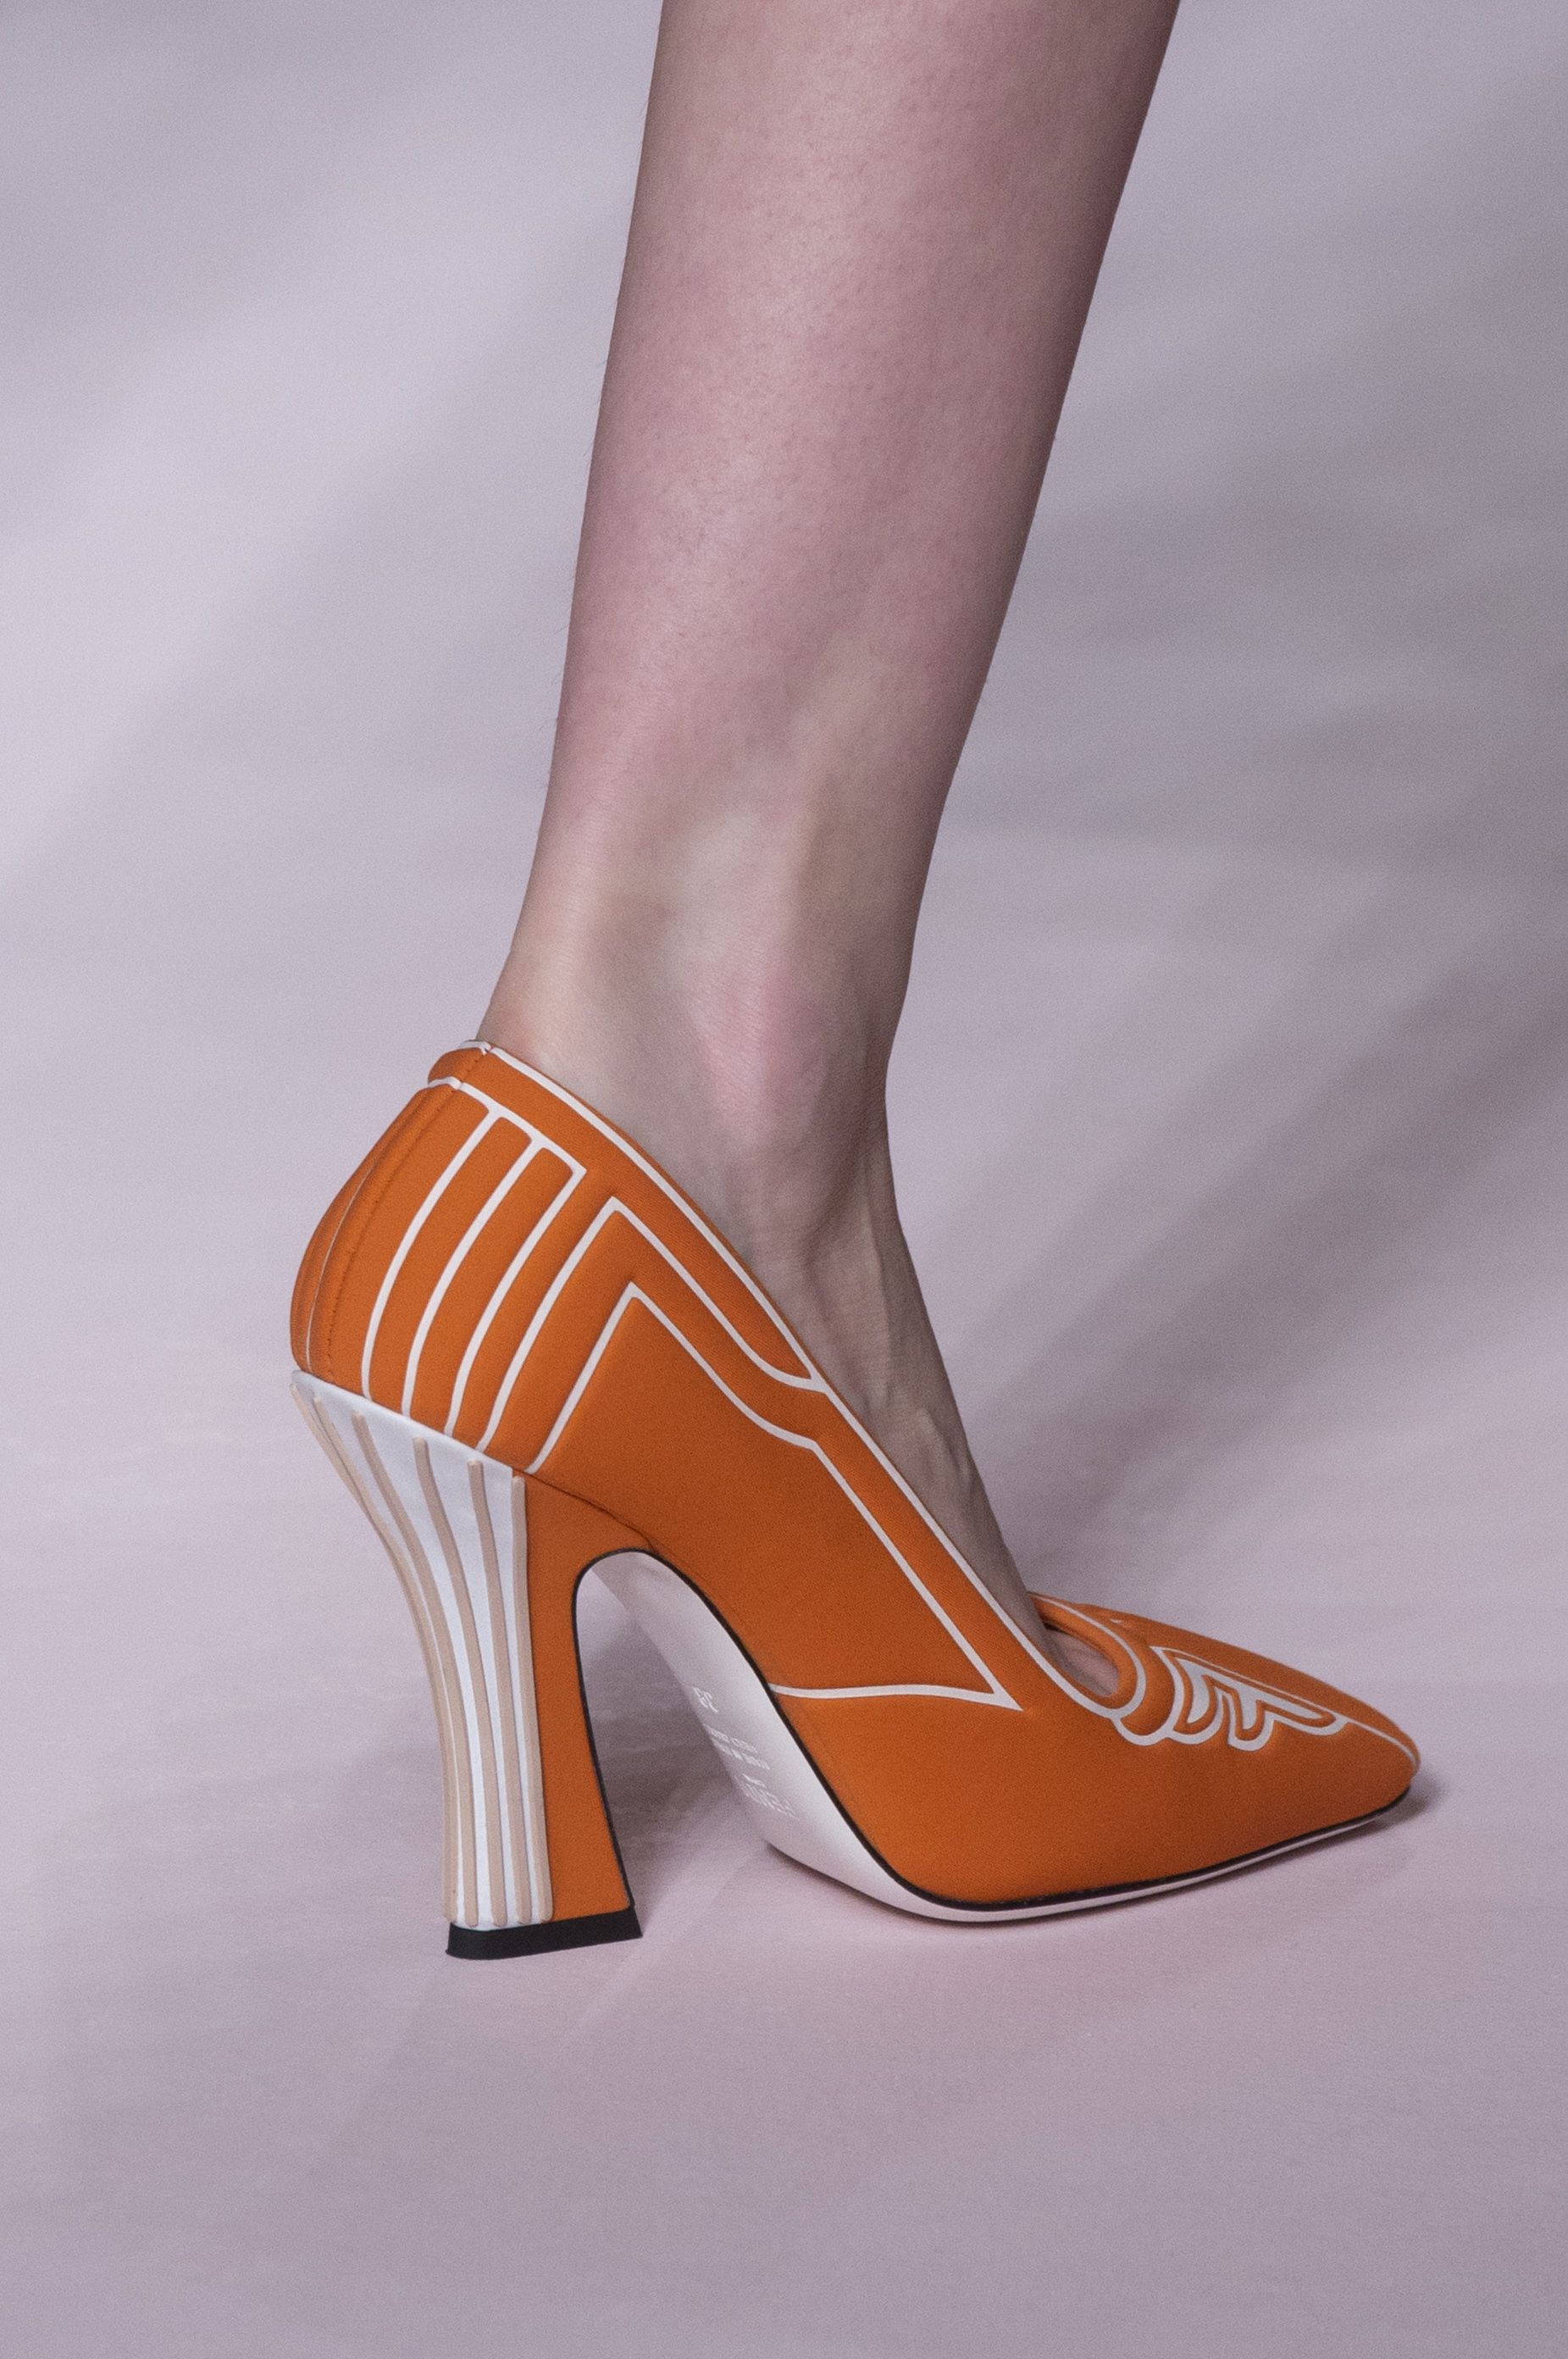 spring 2019 women's shoes